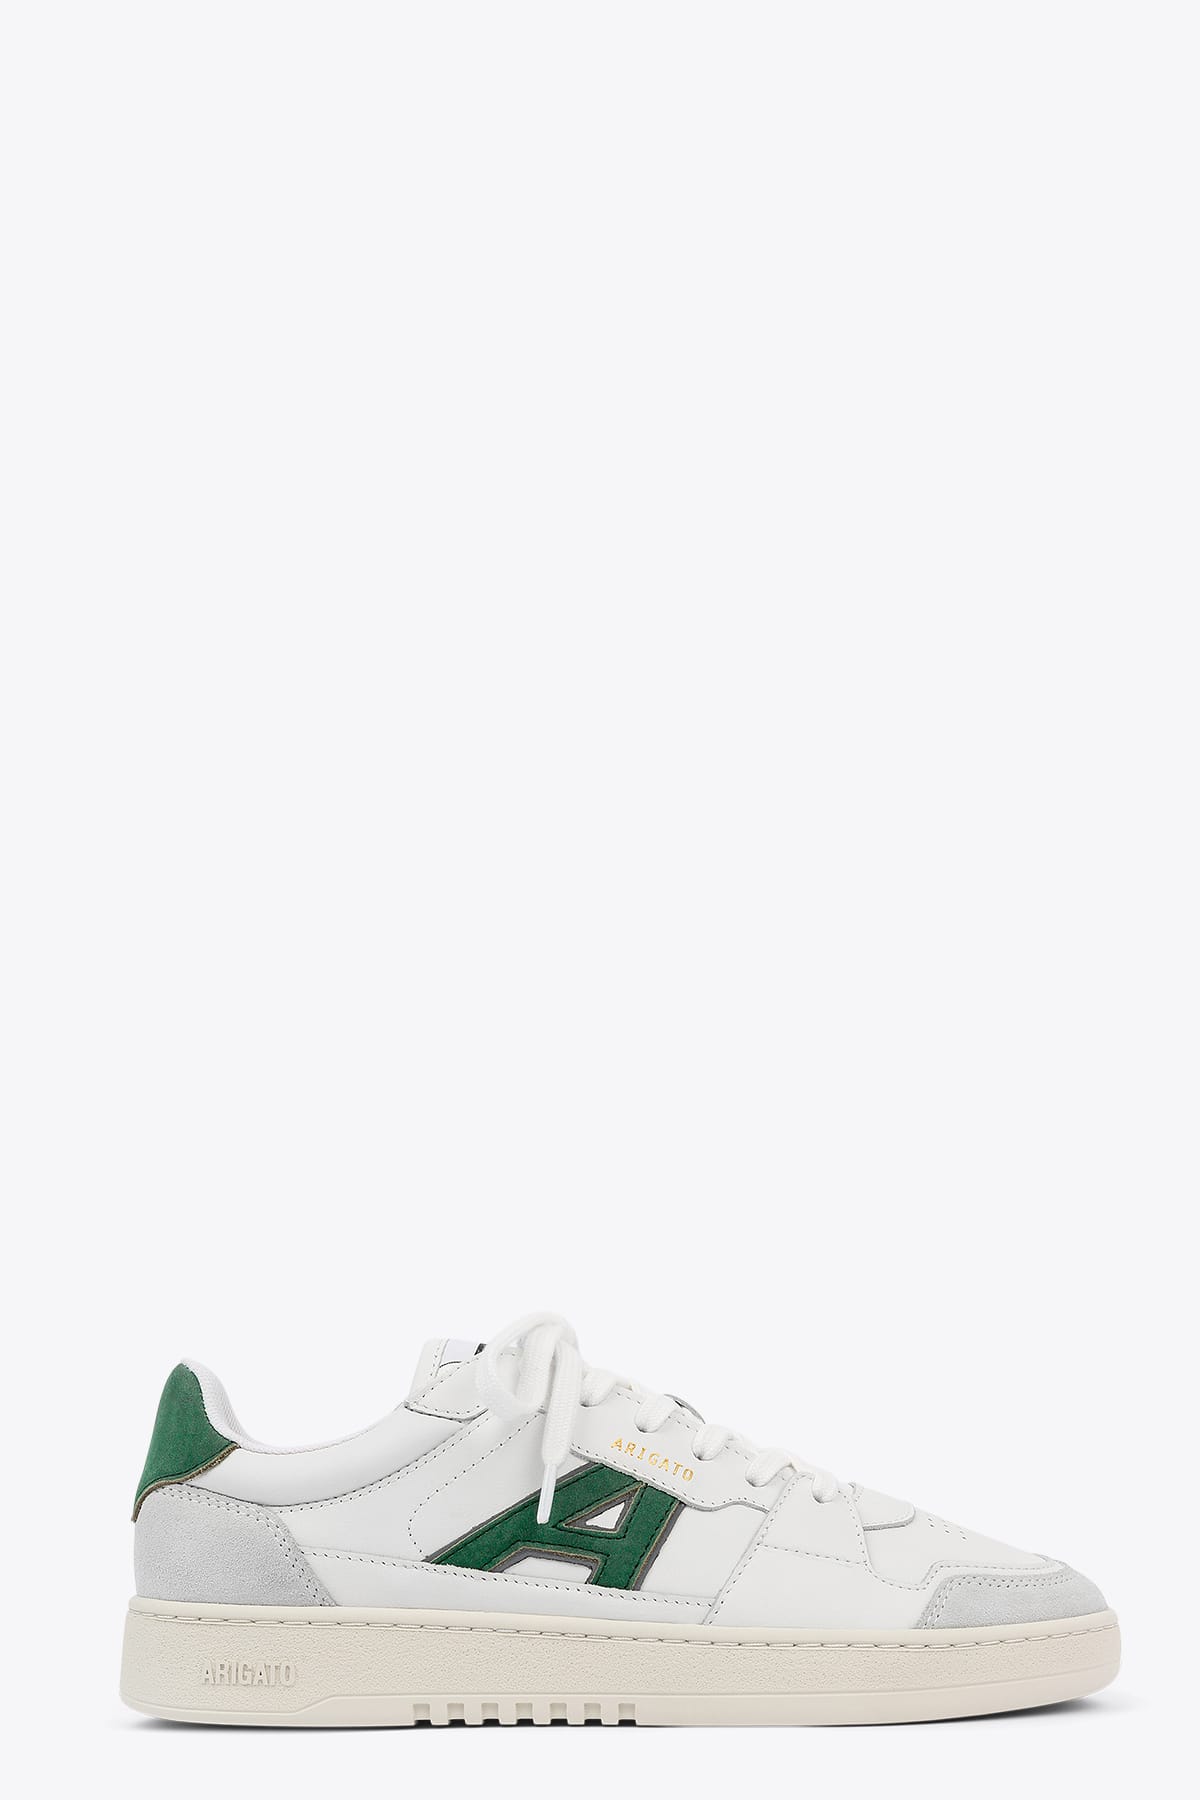 Axel Arigato 41020 A-dice Lo White and green leather low top lace-up sneaker - A-dice low